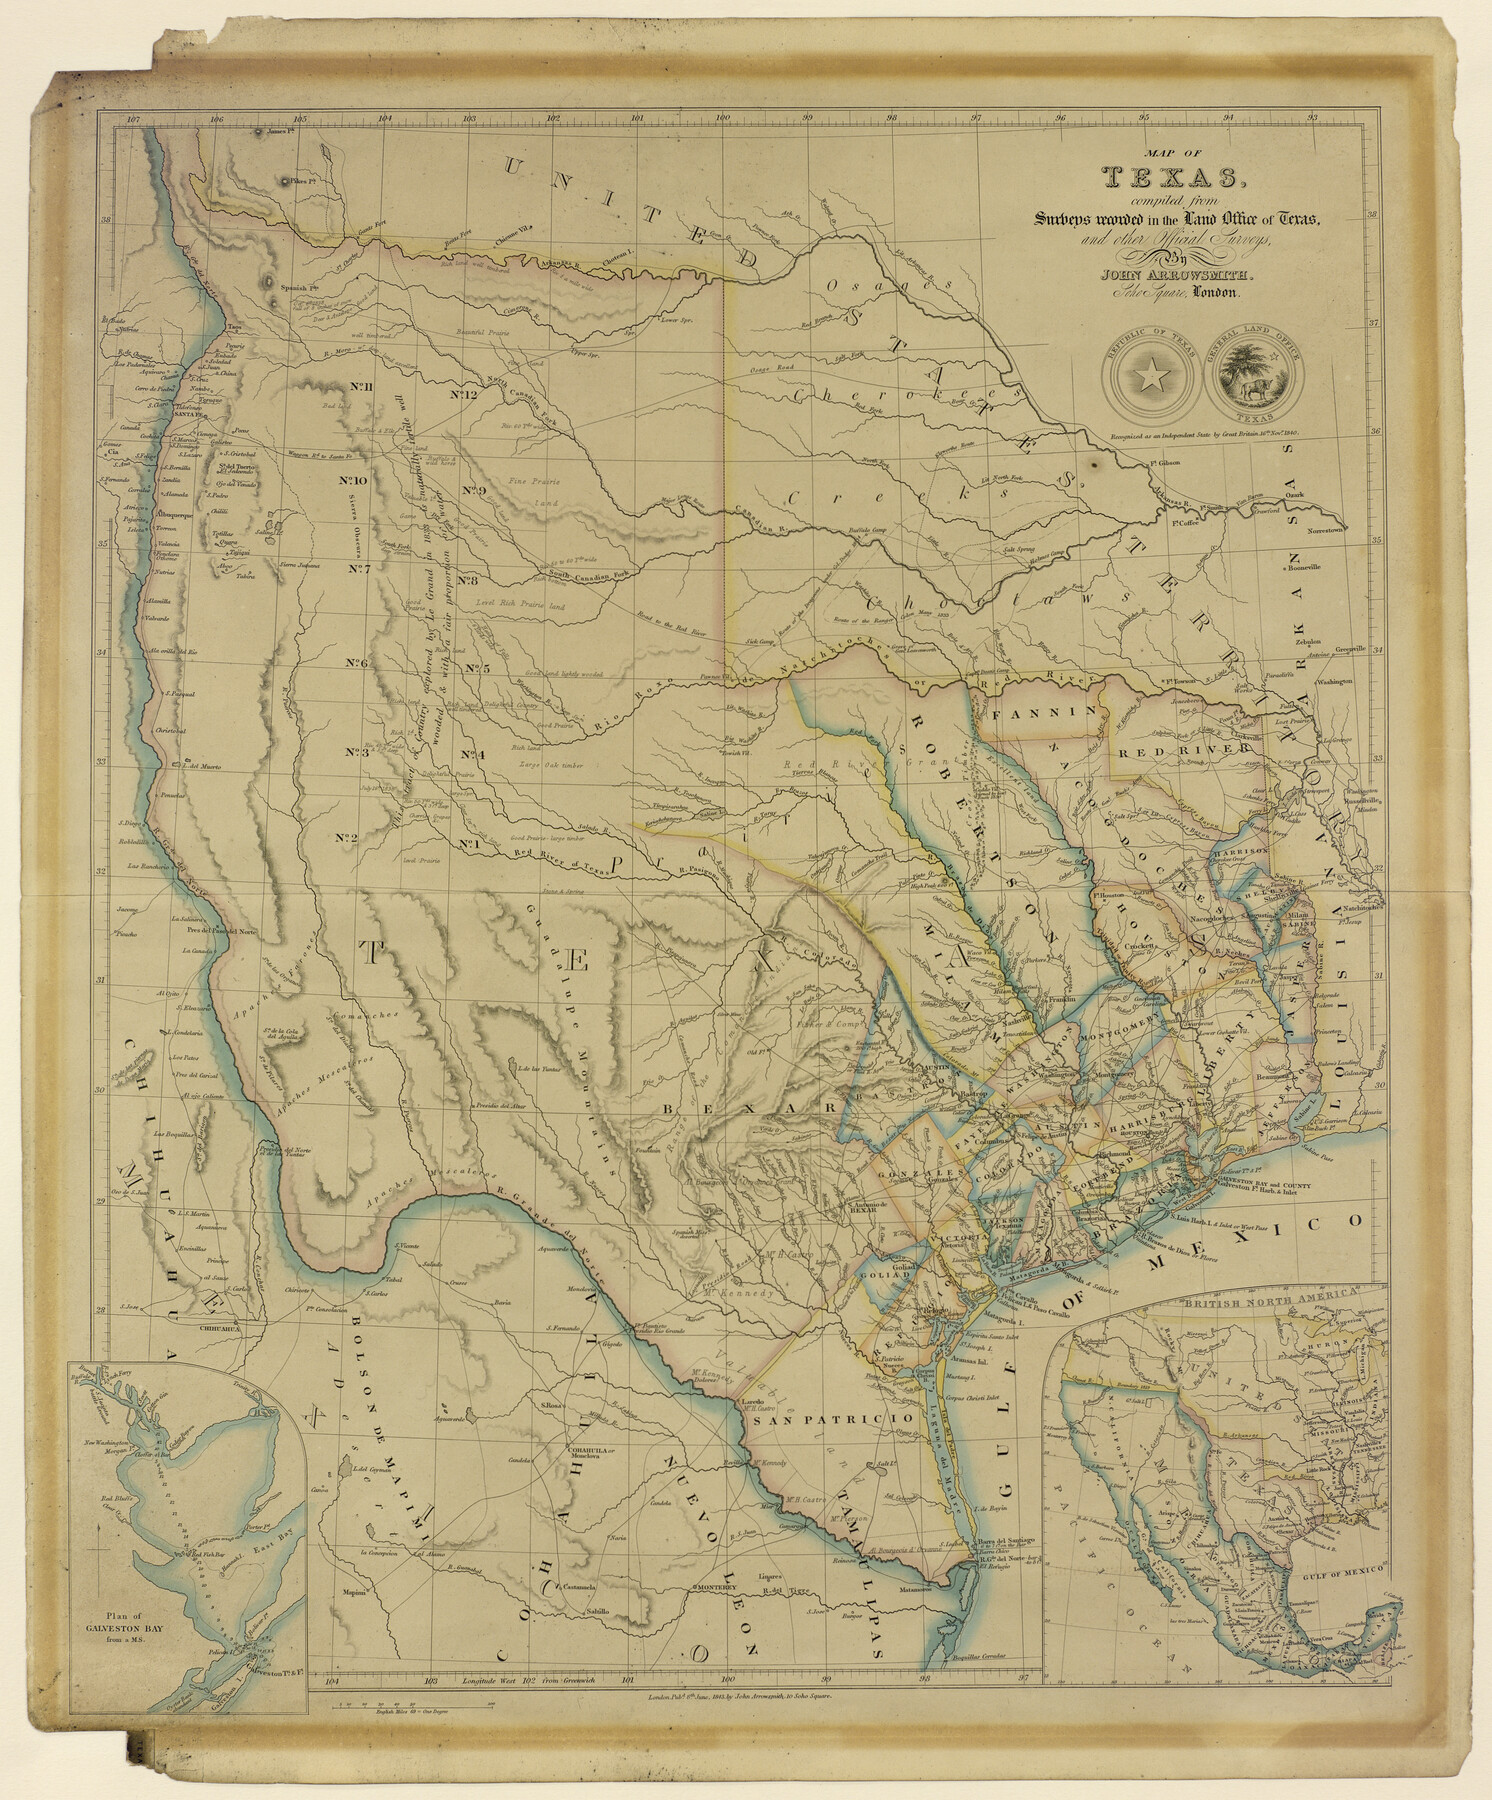 93863, Map of Texas compiled from surveys recorded in the Land Office of Texas, and other official surveys, Holcomb Digital Map Collection